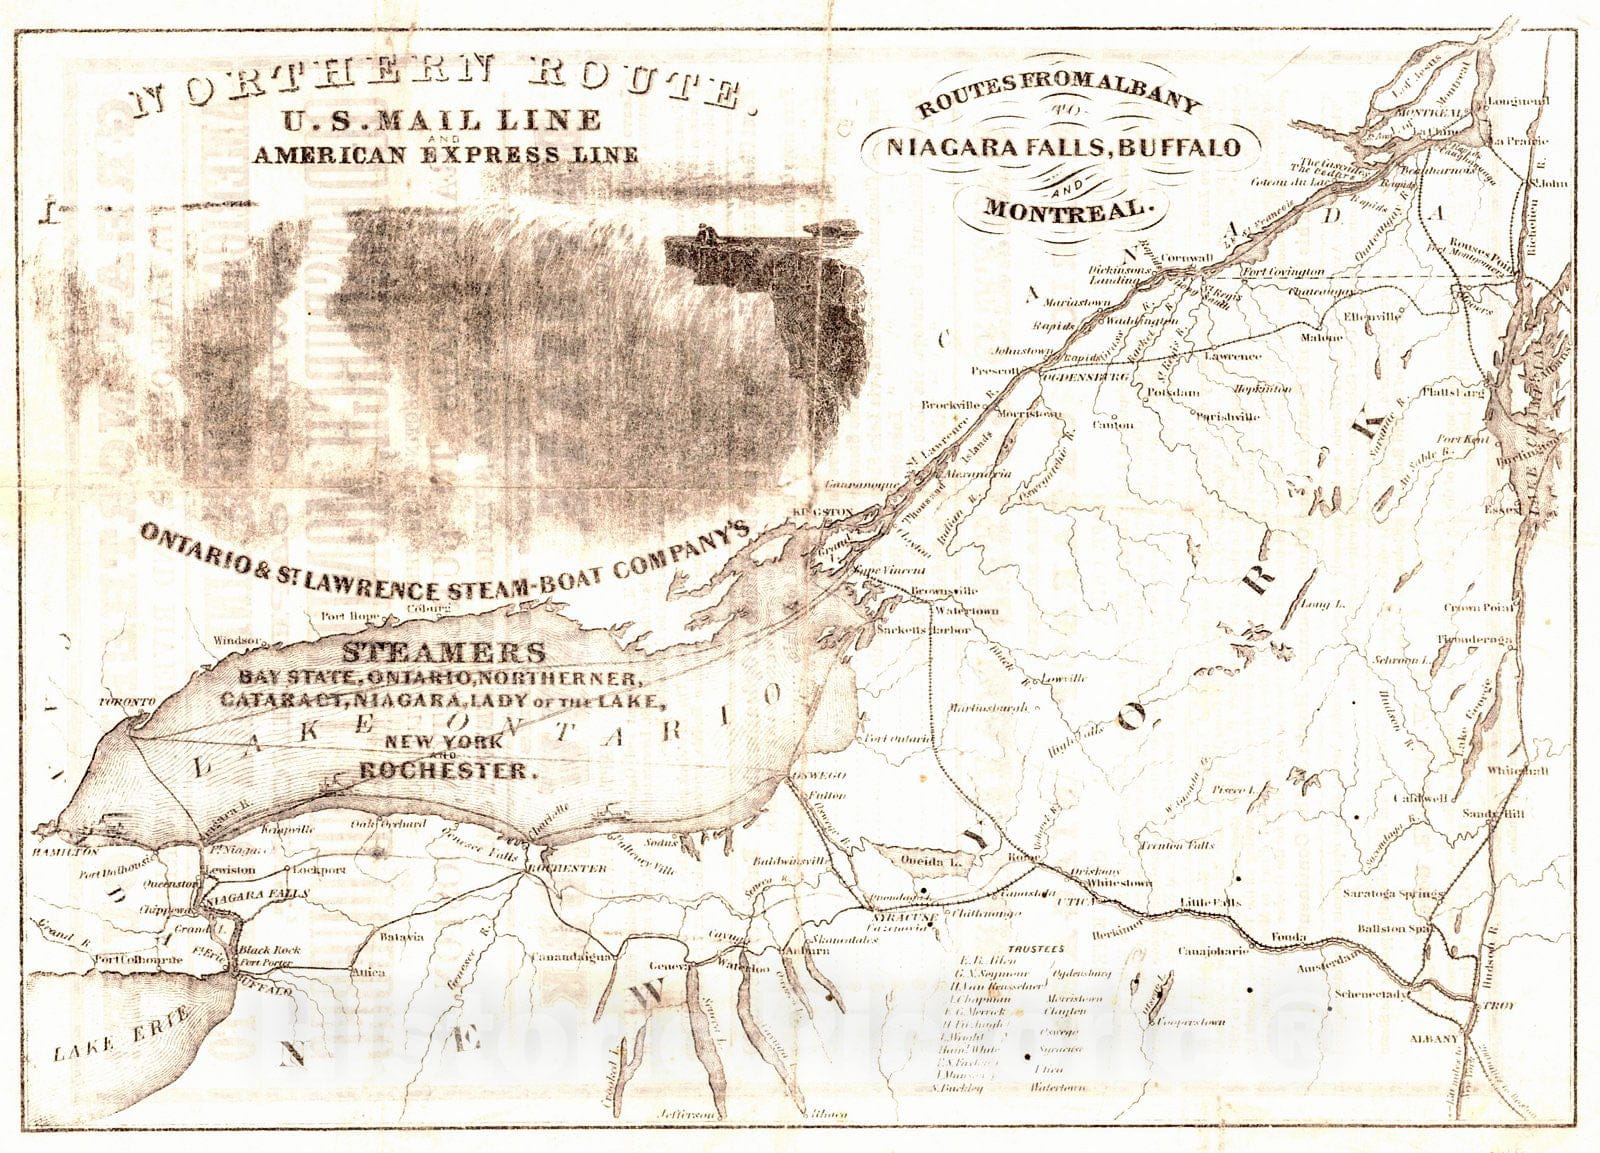 Historic Map : 1850 Northern Route U.S. Mail Line and American Express Line - Routes from Albany to Niagara Falls, Buffalo and Montreal : Vintage Wall Art